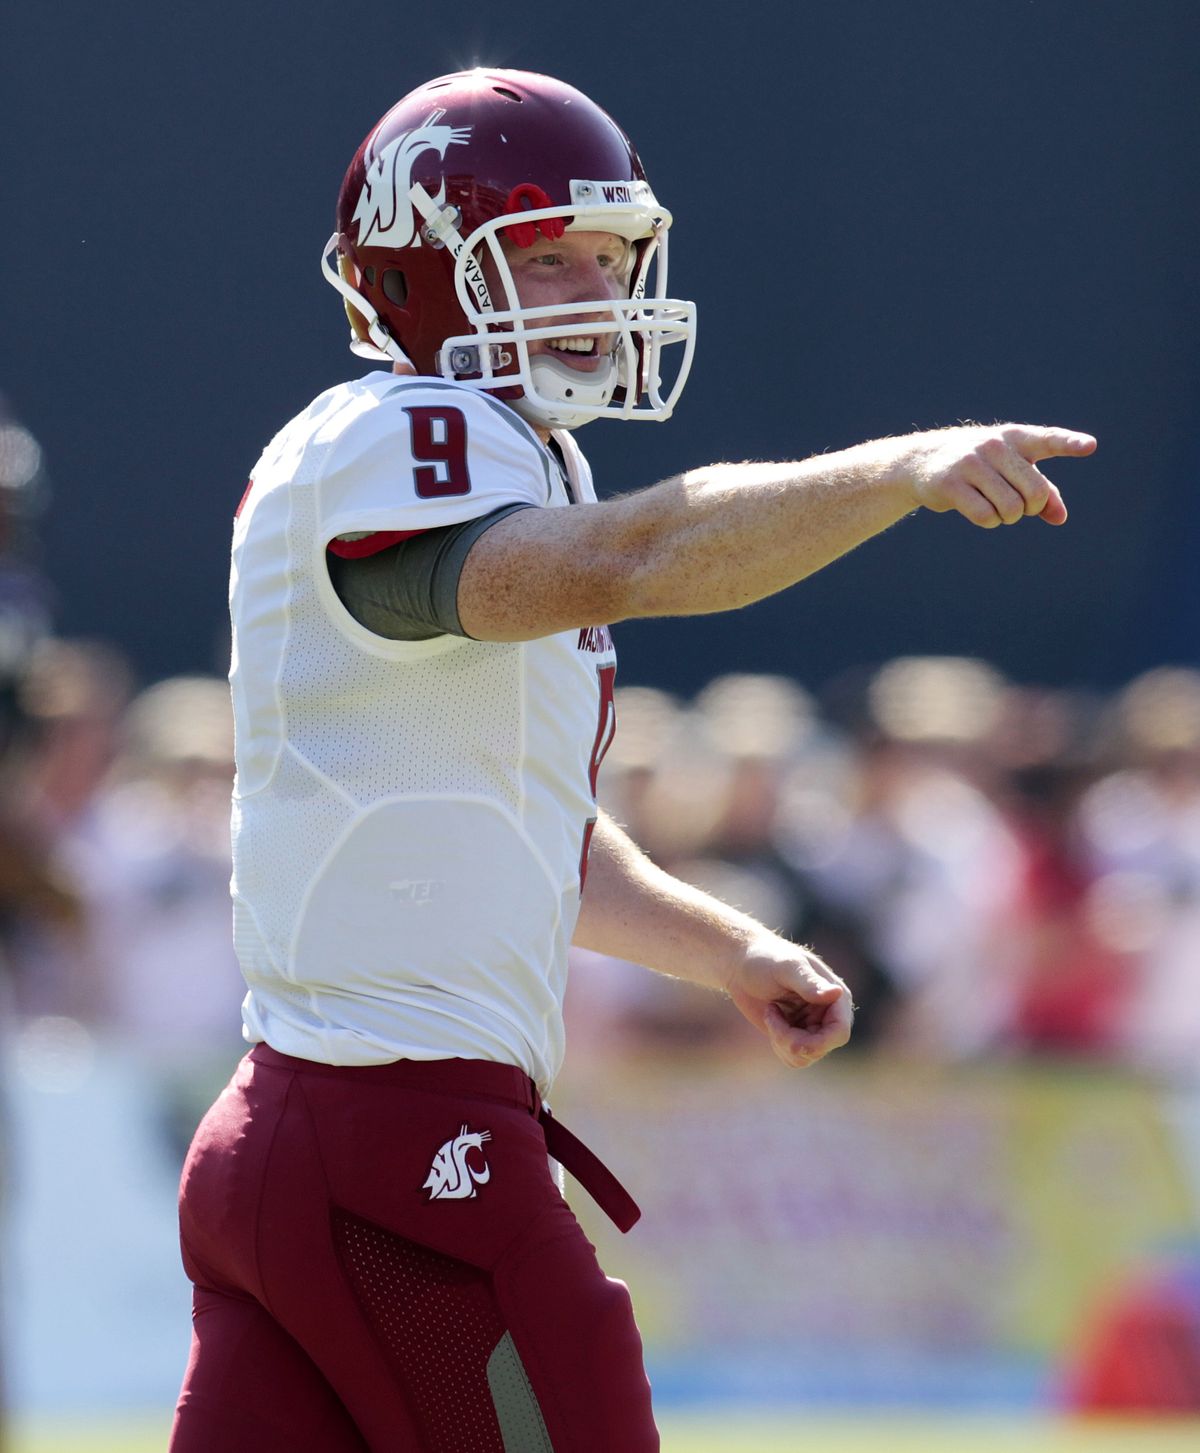 WSU QB Marshall Lobbestael will need protection to succeed against Buffs. (Associated Press)